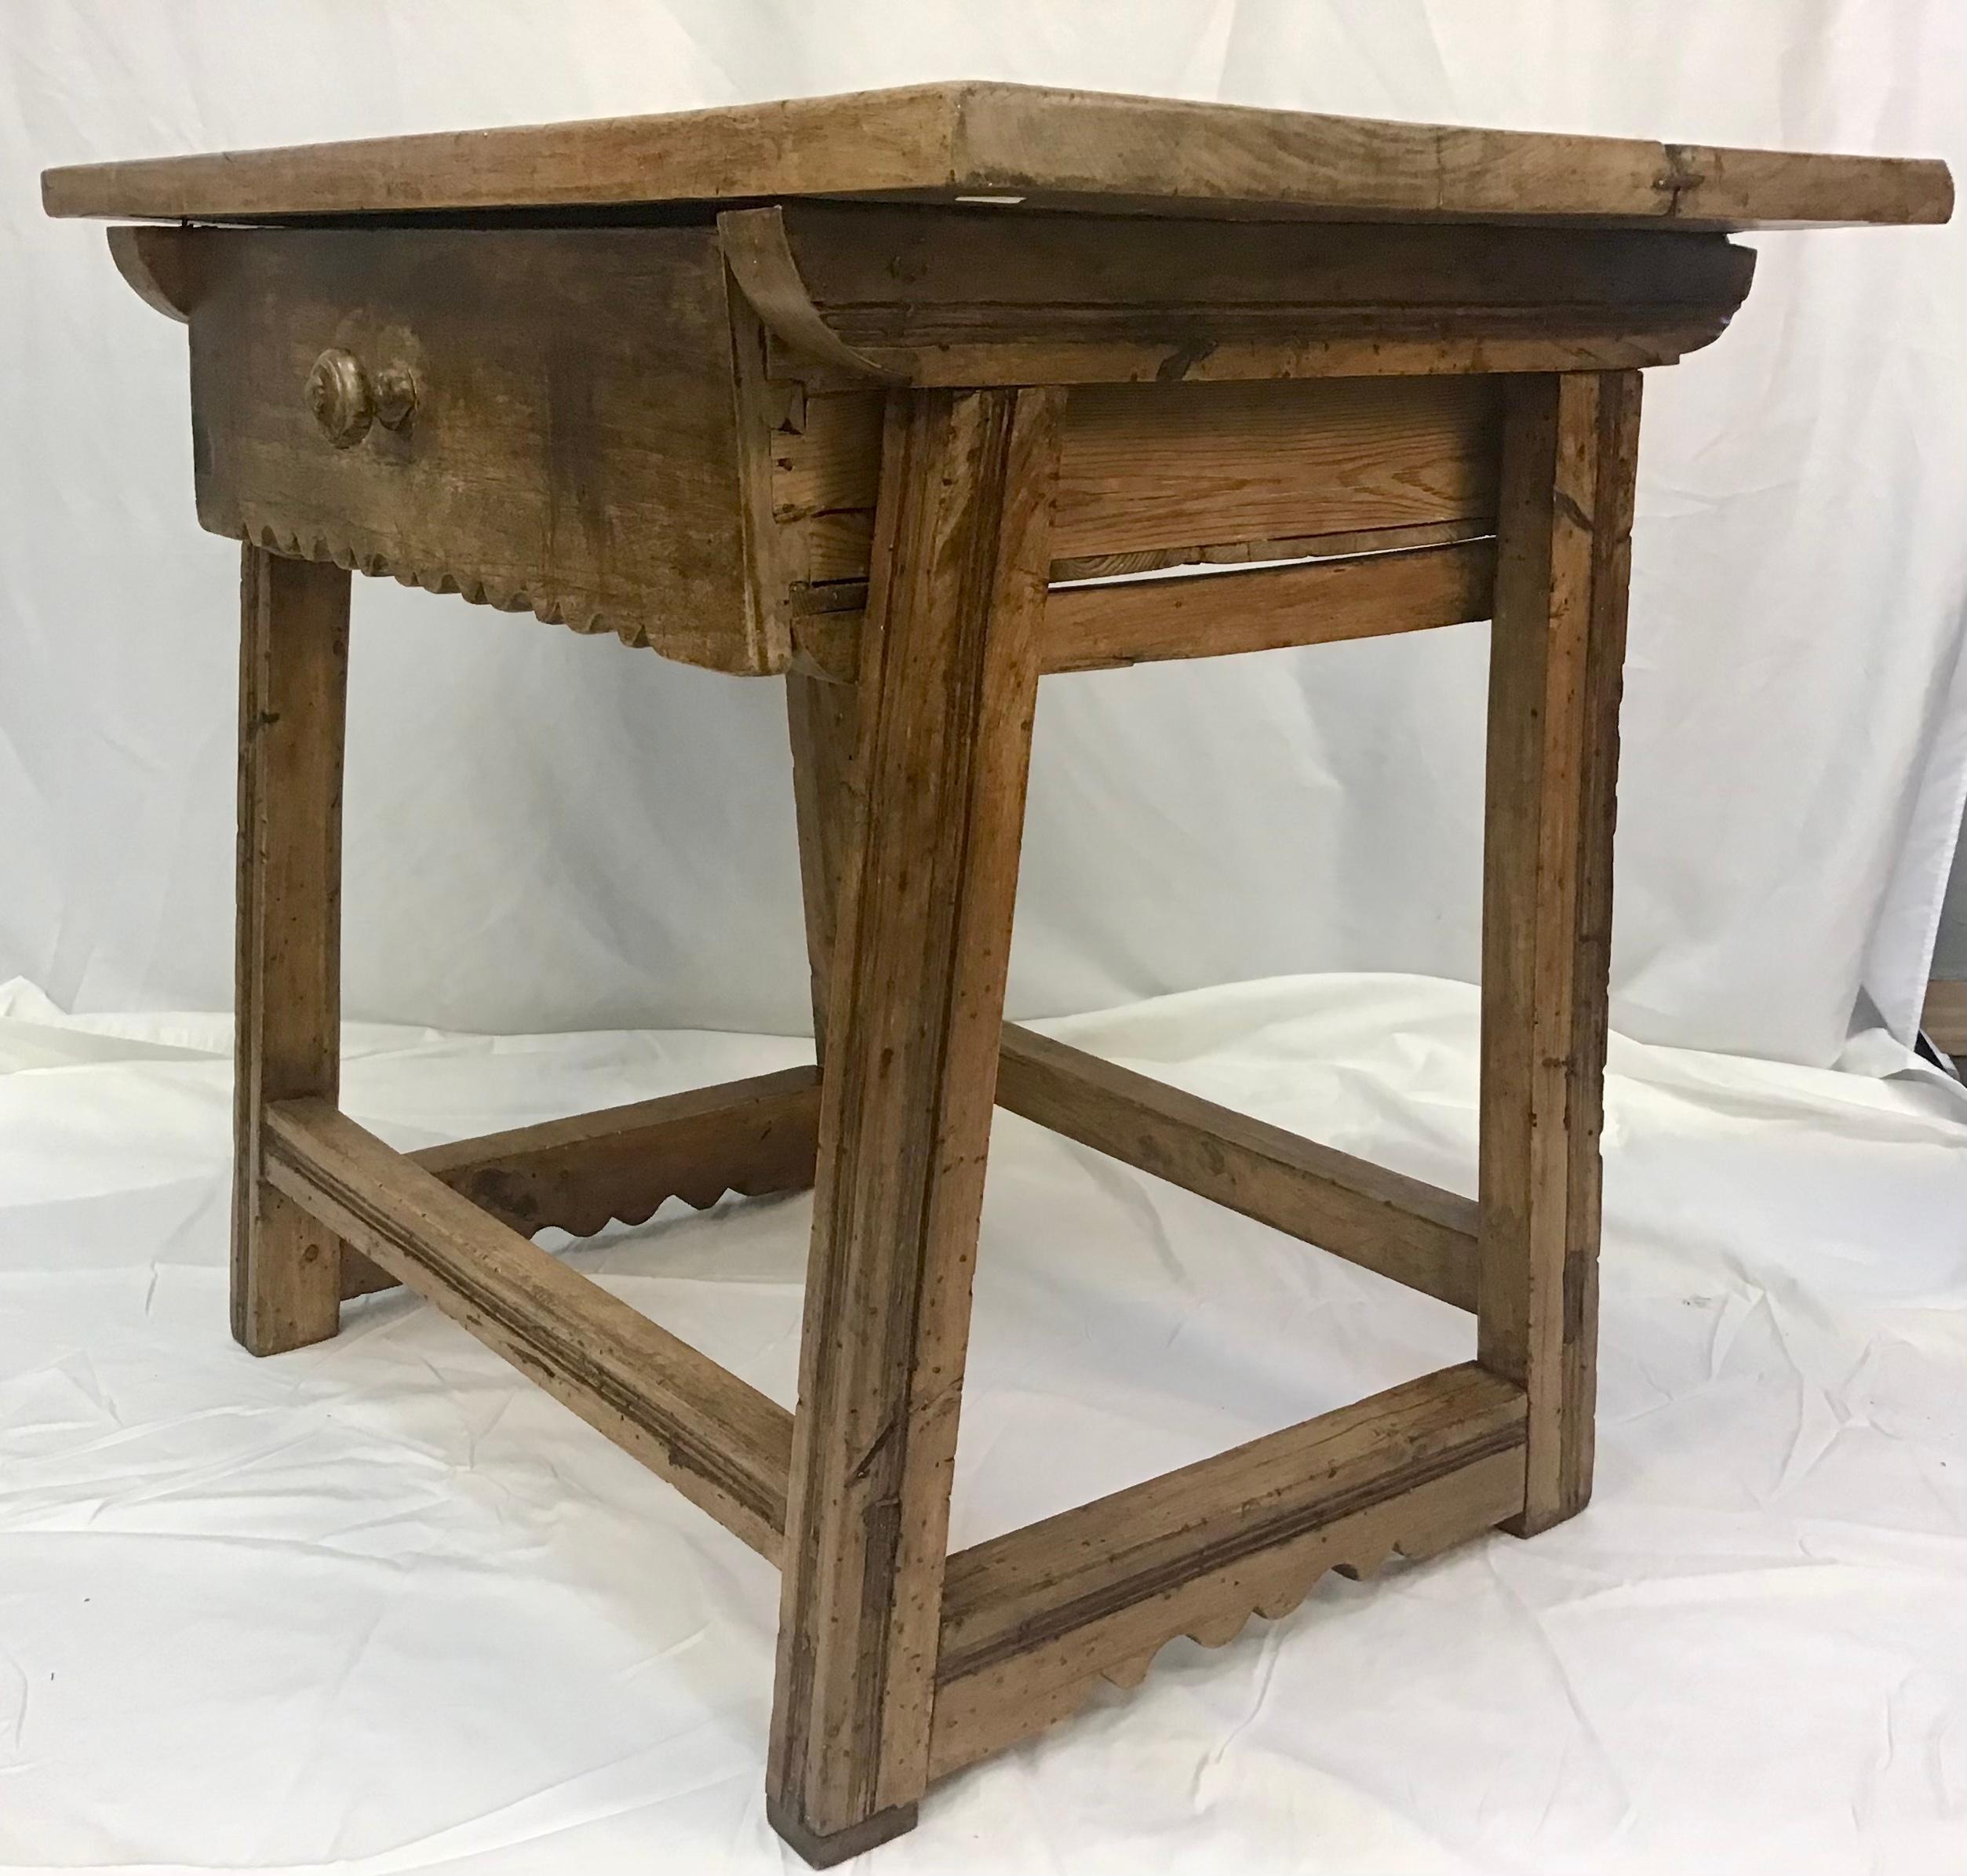 18th Century and Earlier Spanish Colonial Period One-Drawer Hacienda Table, 18th Century